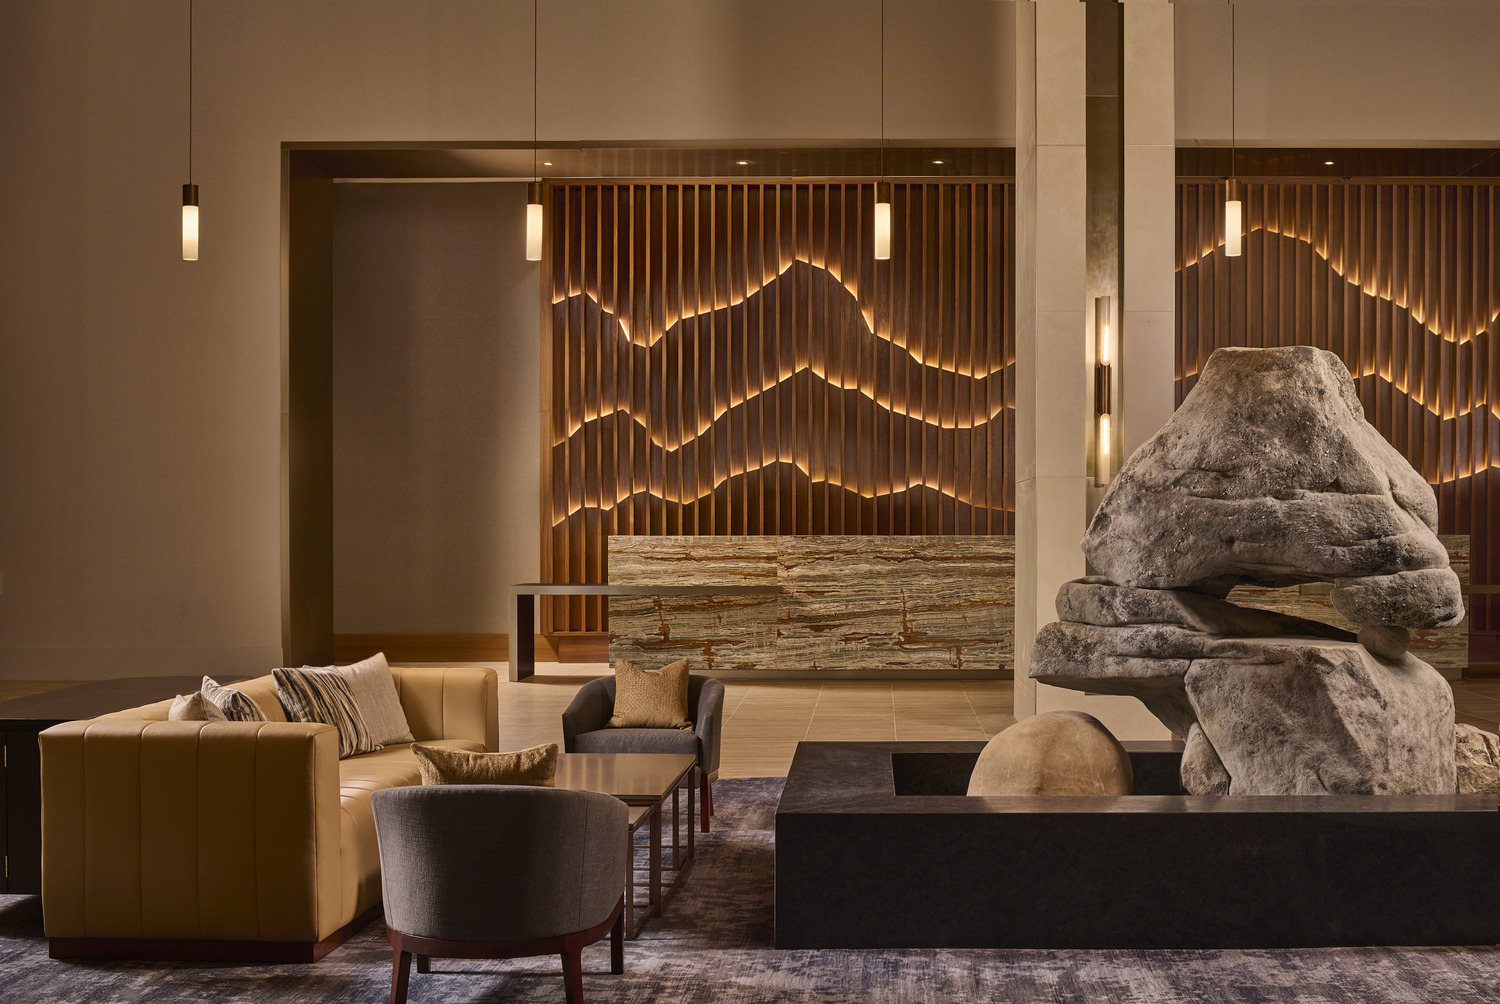 The lobby of a hotel with a stone wall.